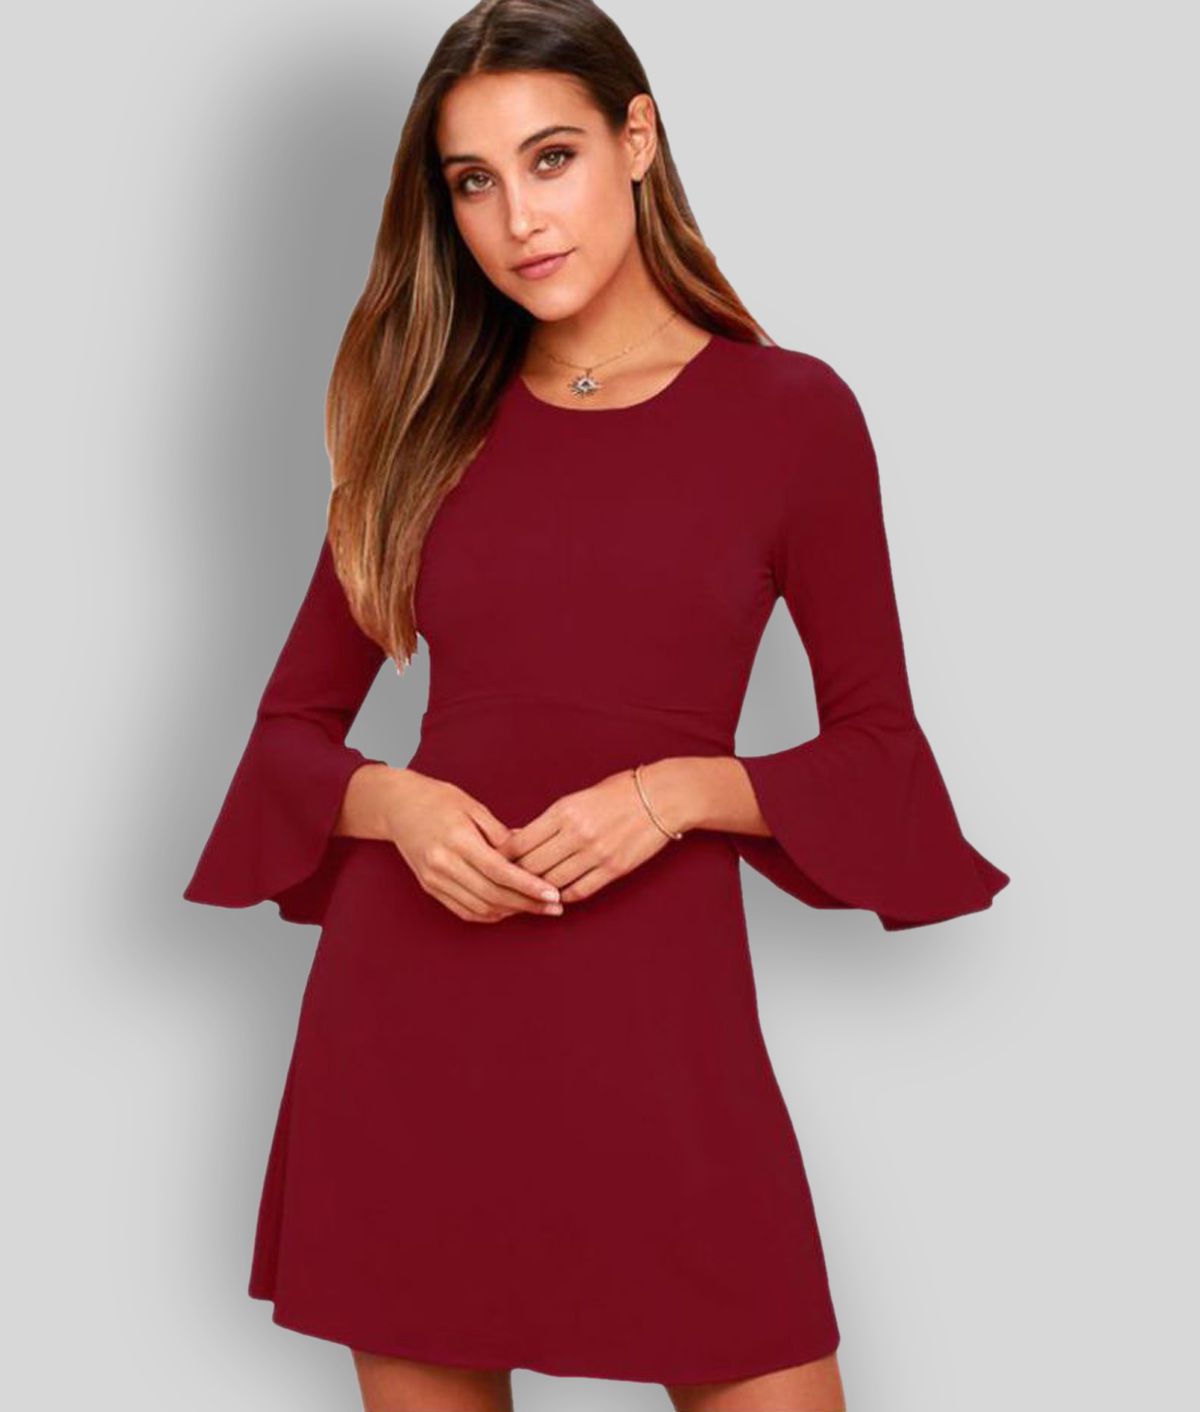     			Addyvero - Maroon Cotton Blend Women's Fit & Flare Dress ( Pack of 1 )